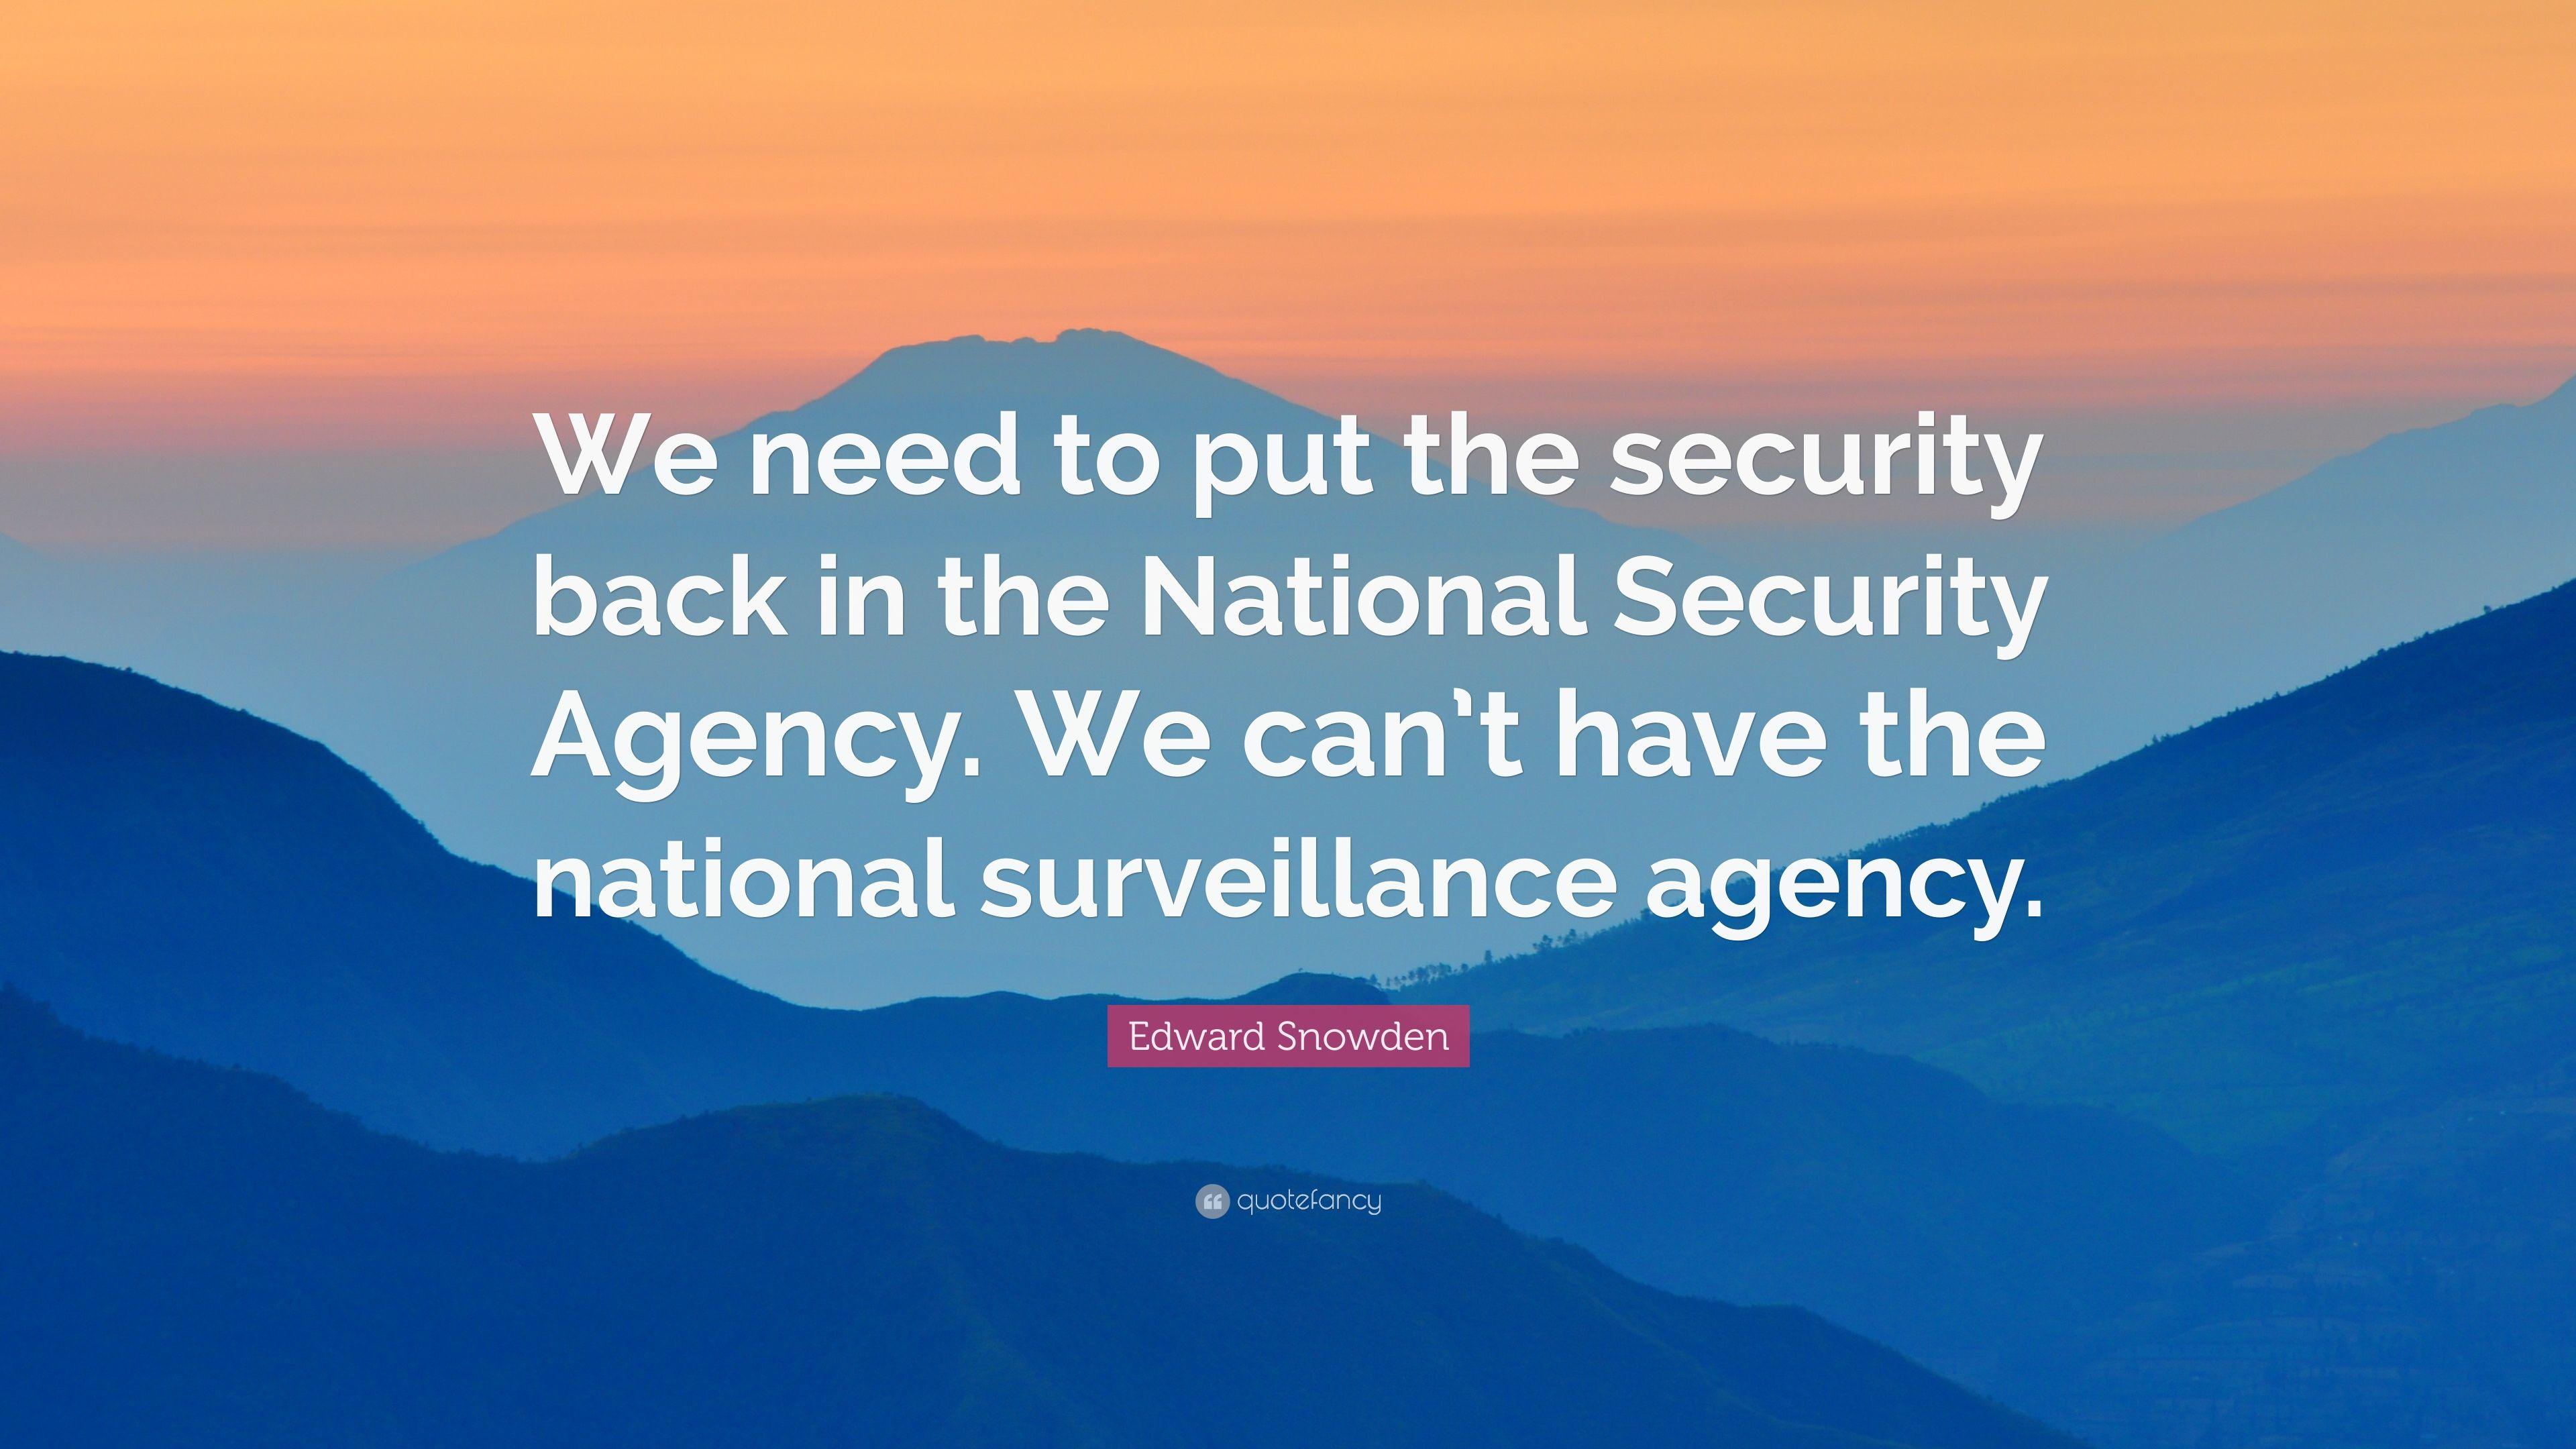 Edward Snowden Quote: “We need to put the security back in